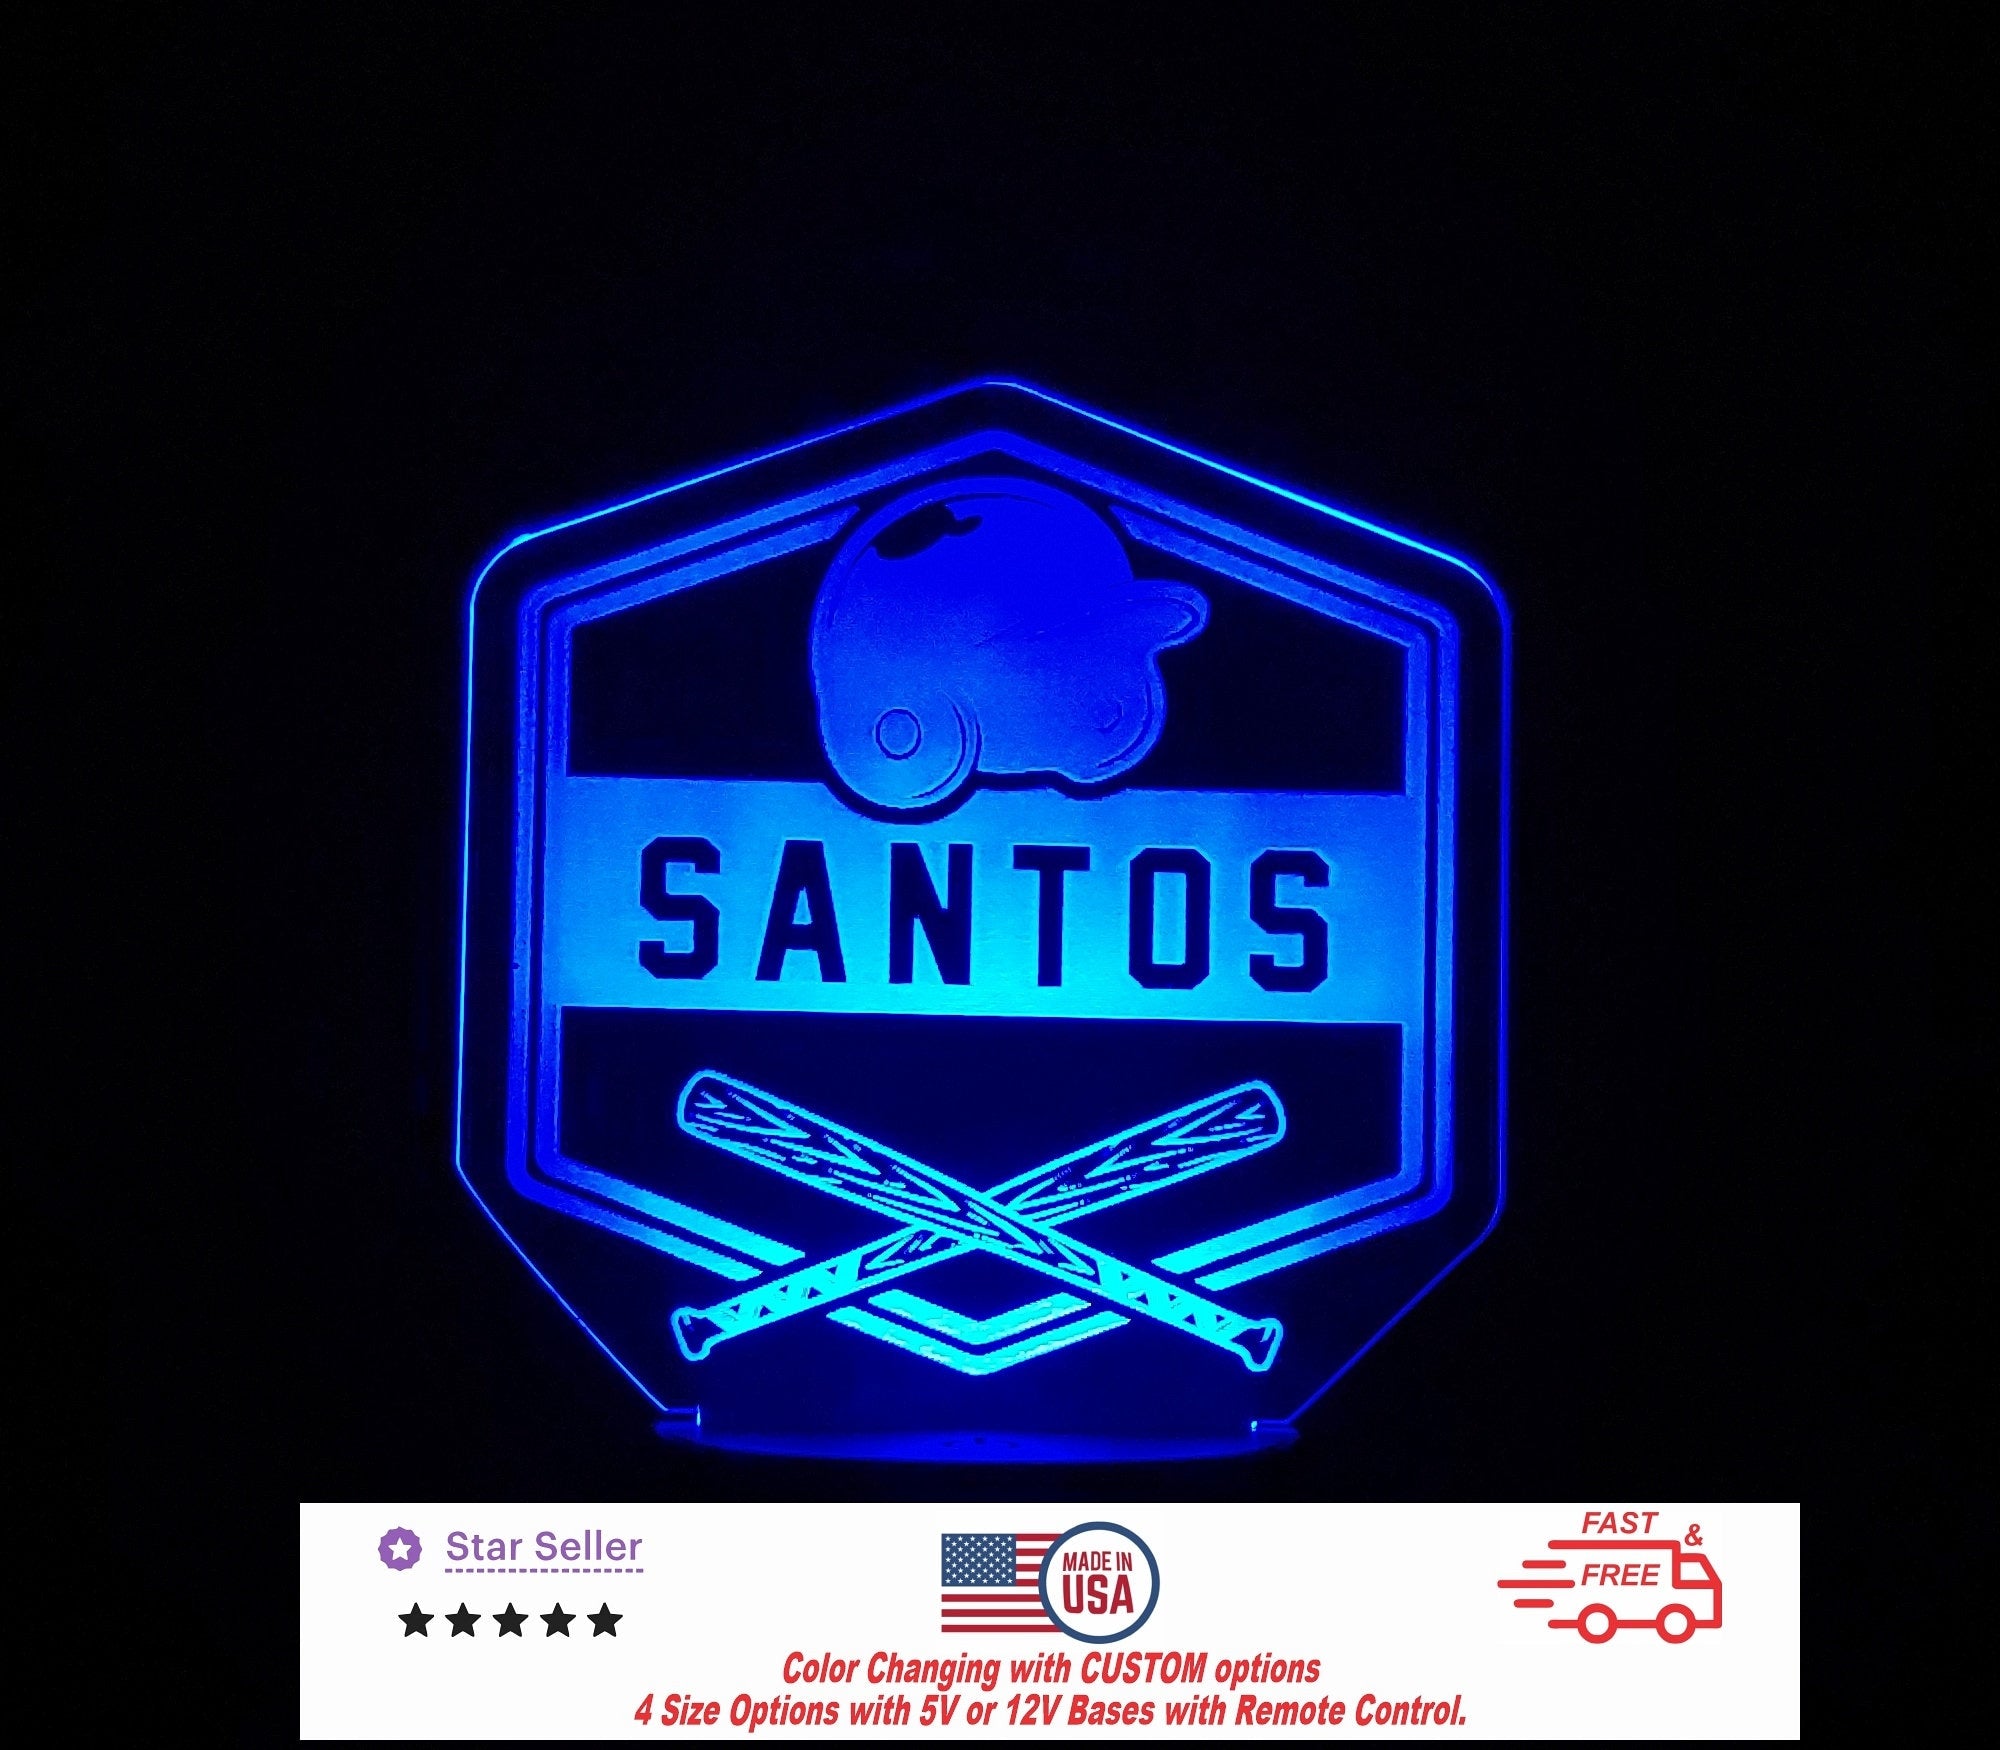 Baseball Personalized LED Night Light - Neon sign, Custom Sport SIgn - Sports Bedroom - Club Decor 4 Sizes Free Shipping Made in USA